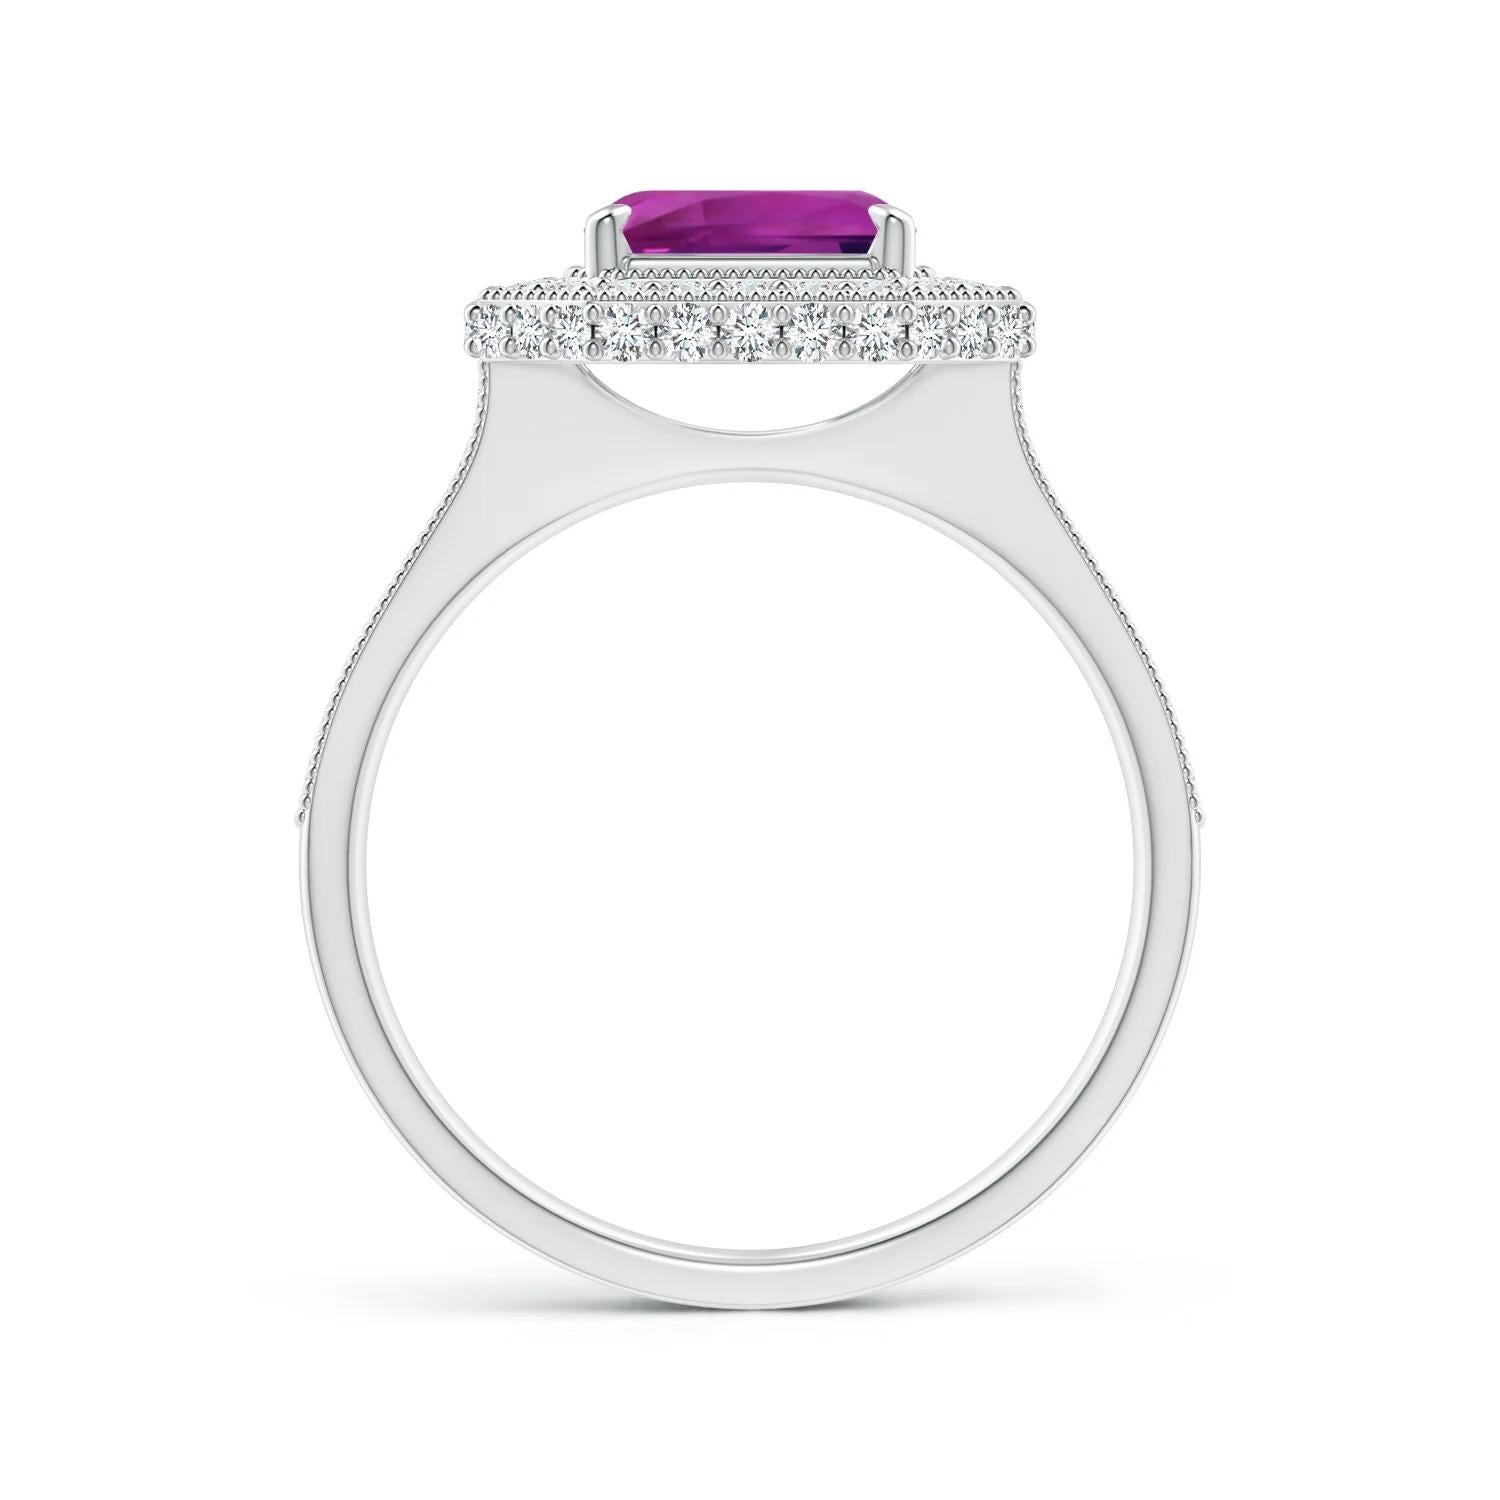 For Sale:  Angara Gia Certified Natural Emerald Cut Pink Sapphire Halo Ring in Platinum 2